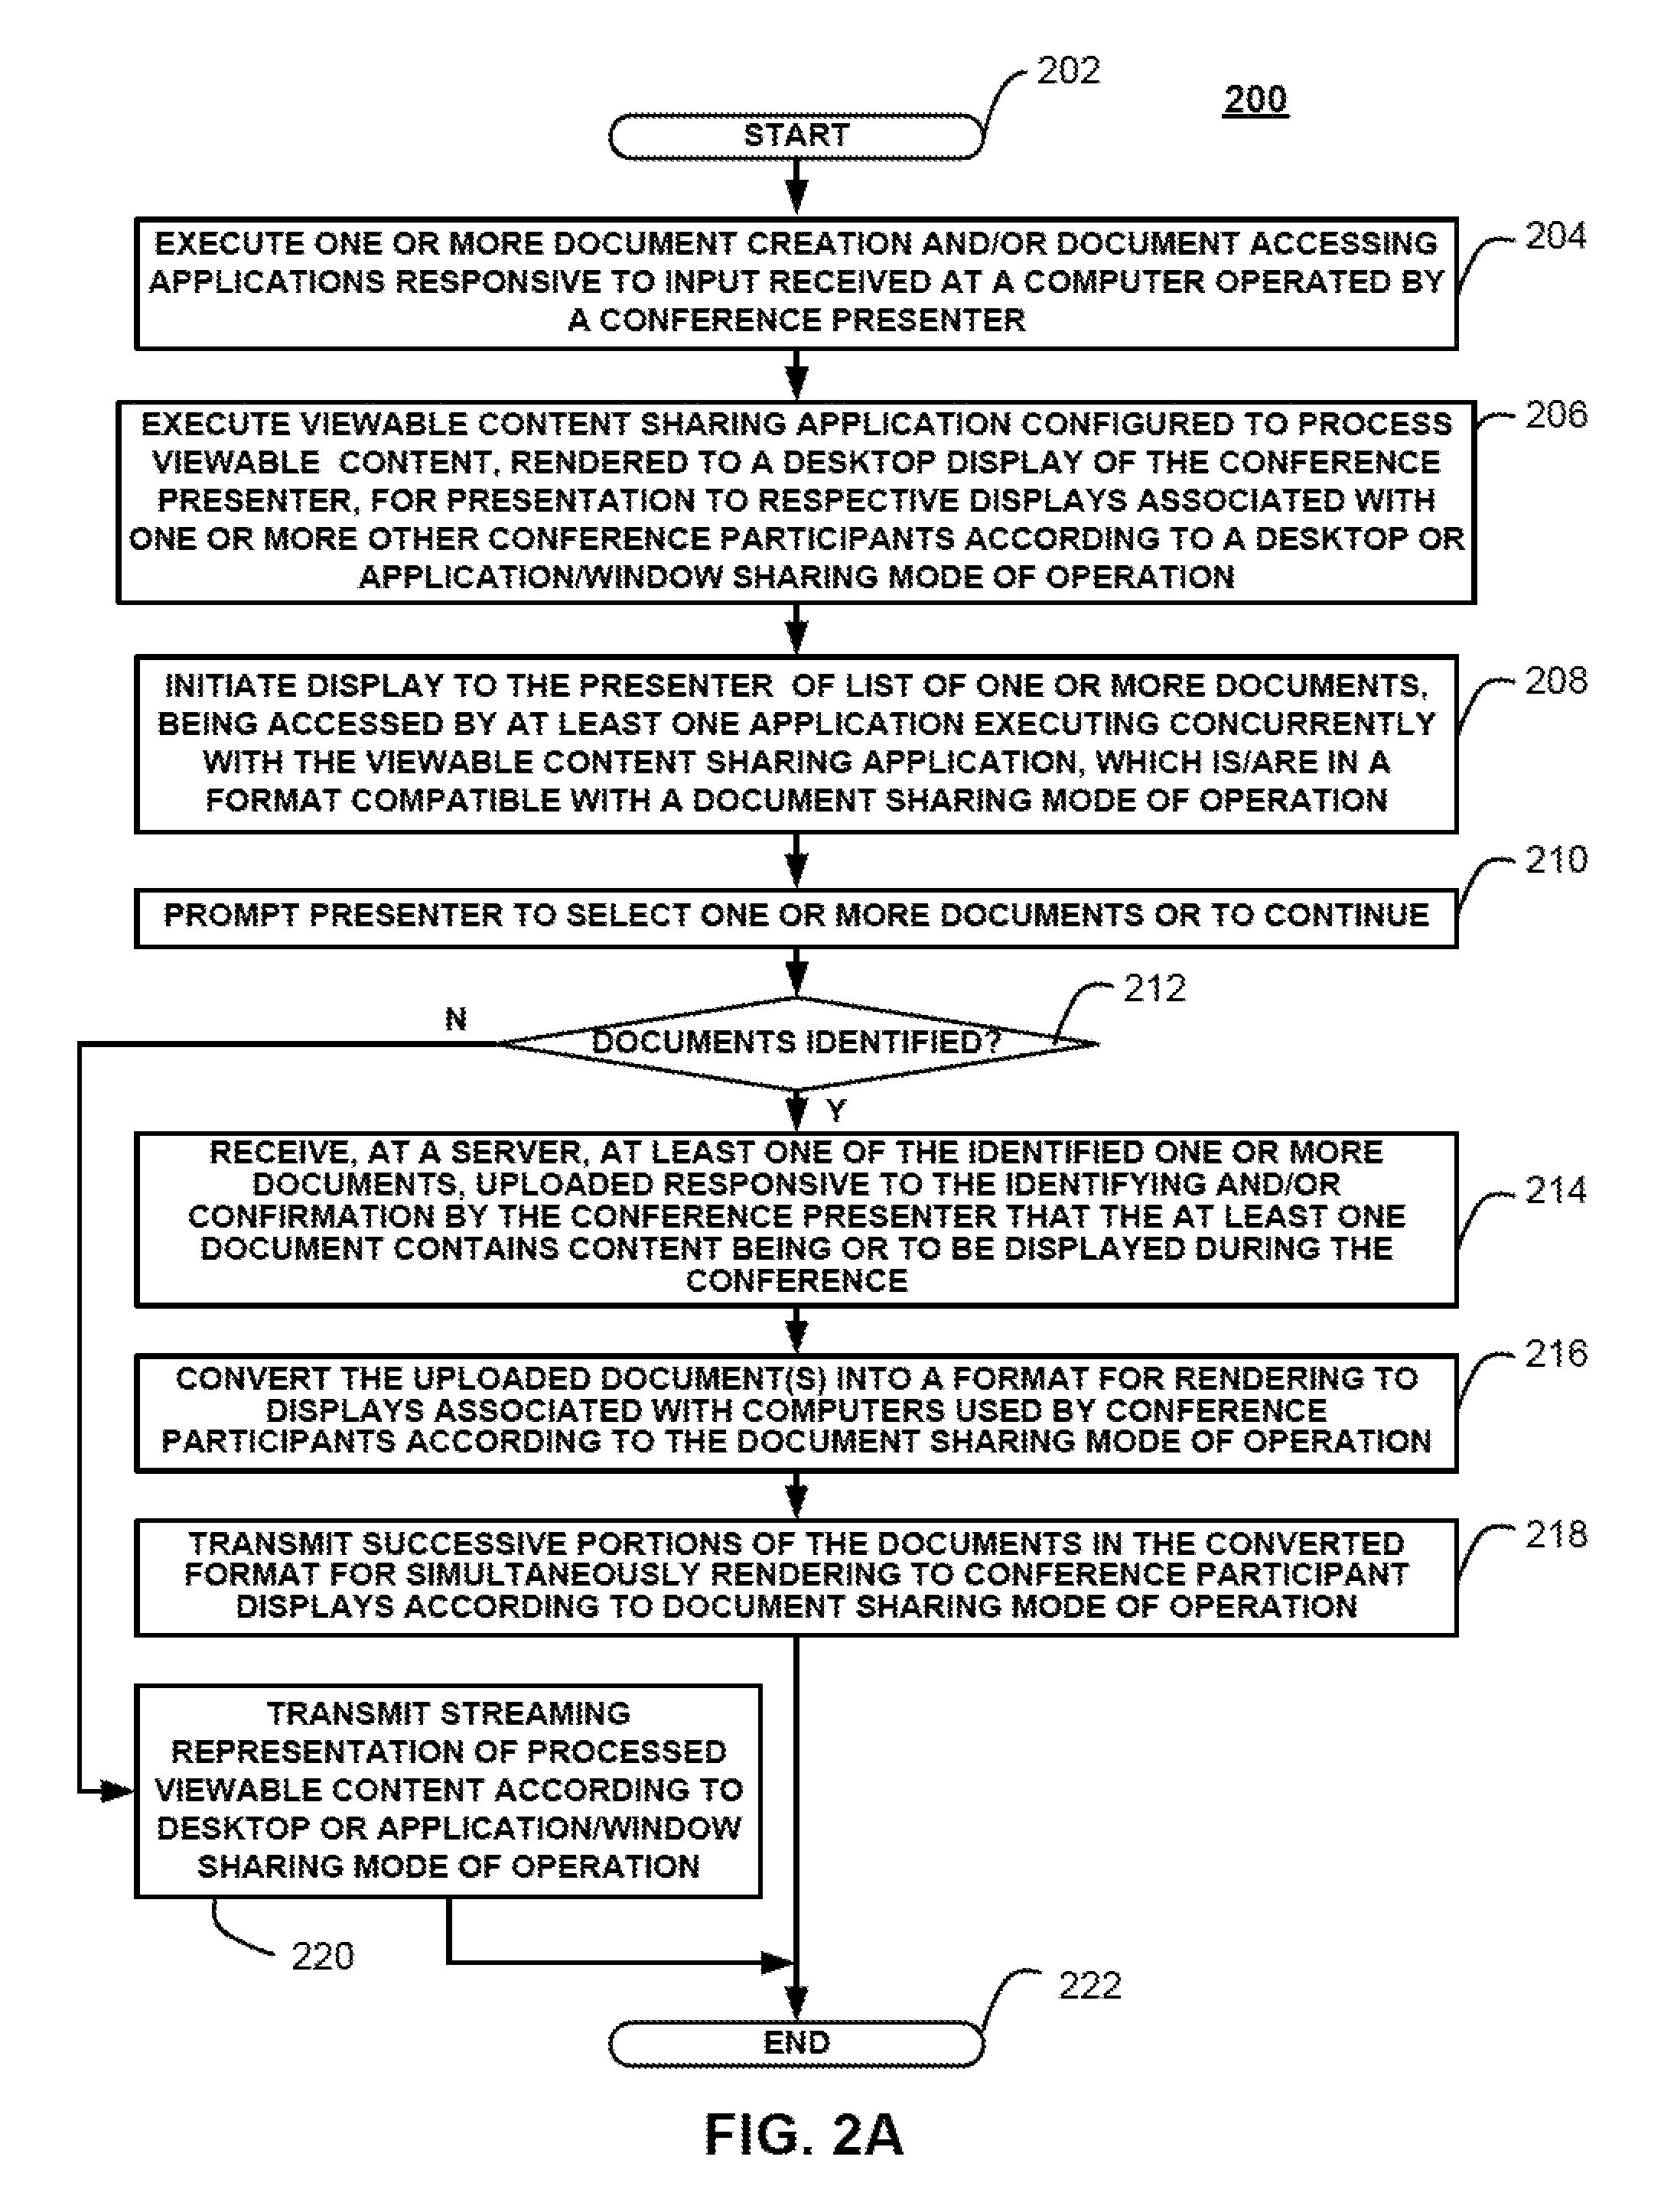 Method and apparatus for sharing viewable content with conference participants through automated identification of content to be shared